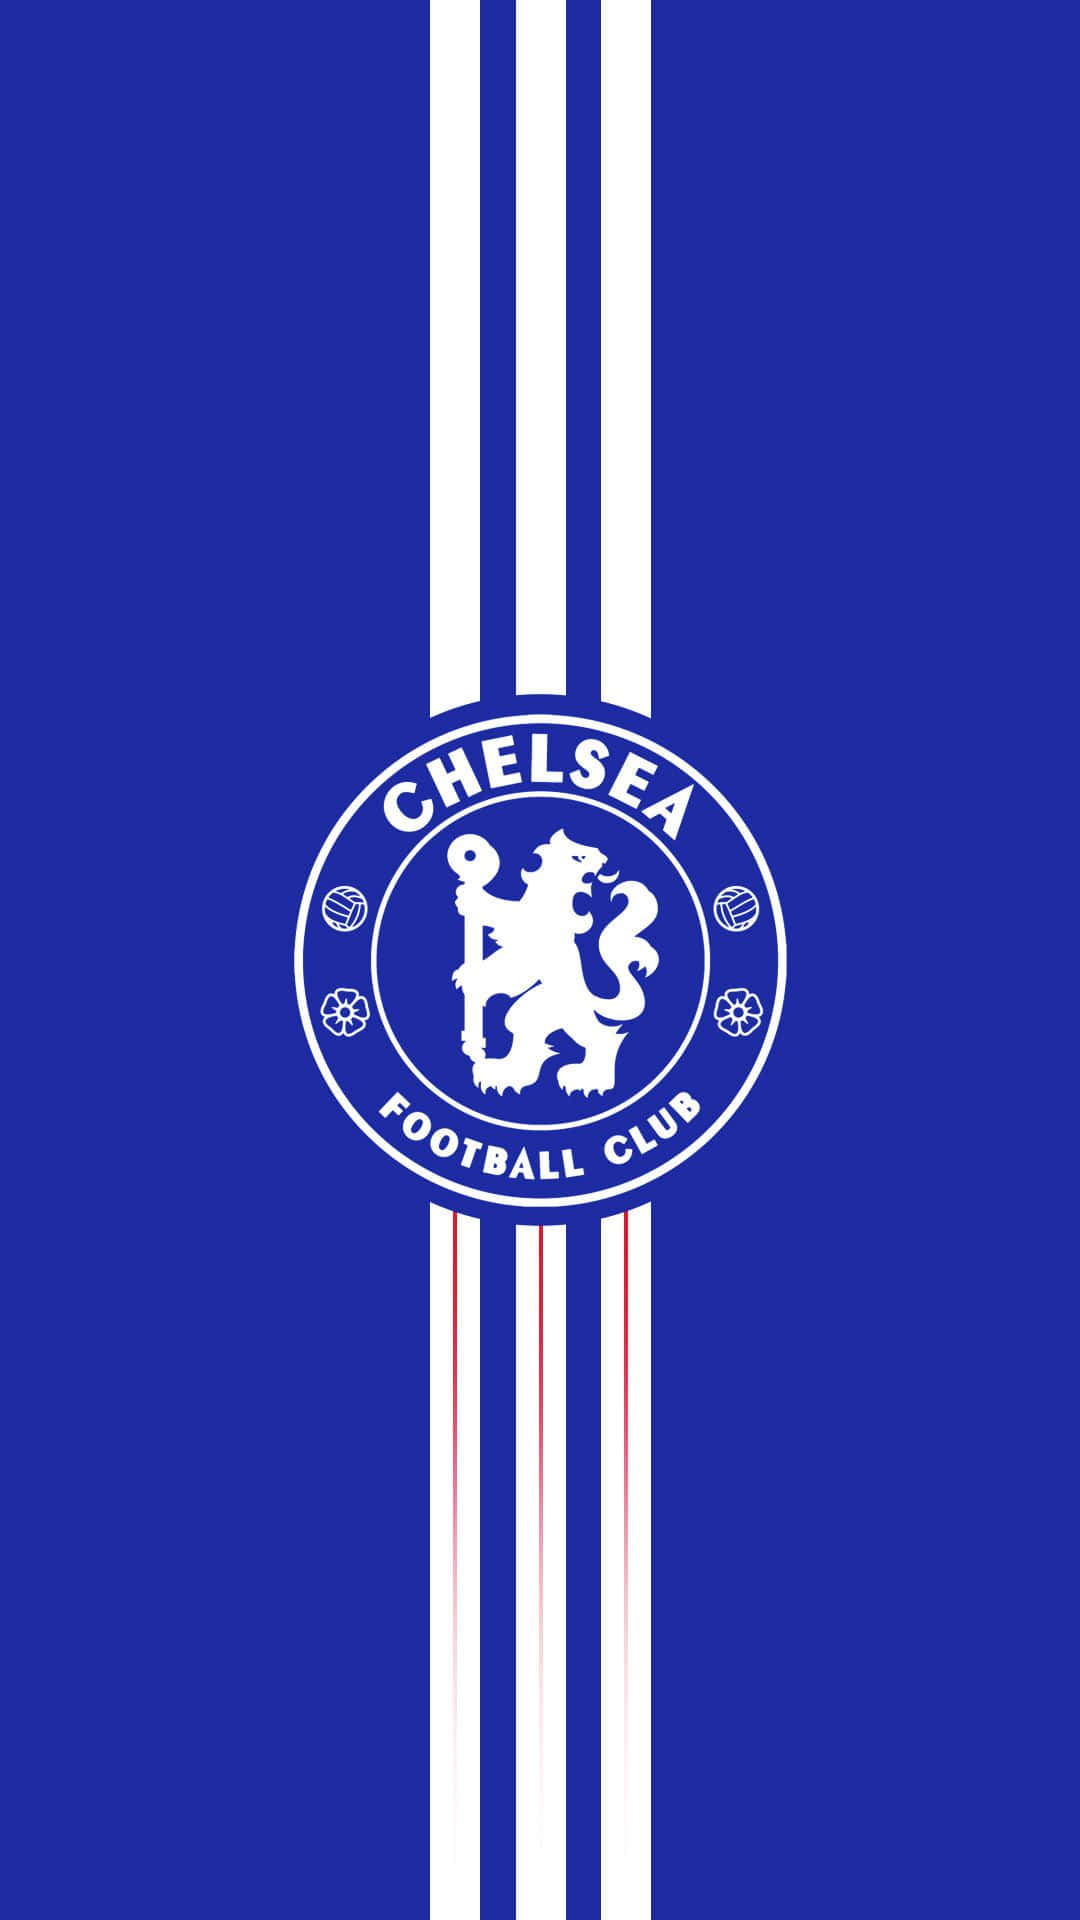 Nyd dit Chelsea-hold entusiasme med din iPhone! Wallpaper